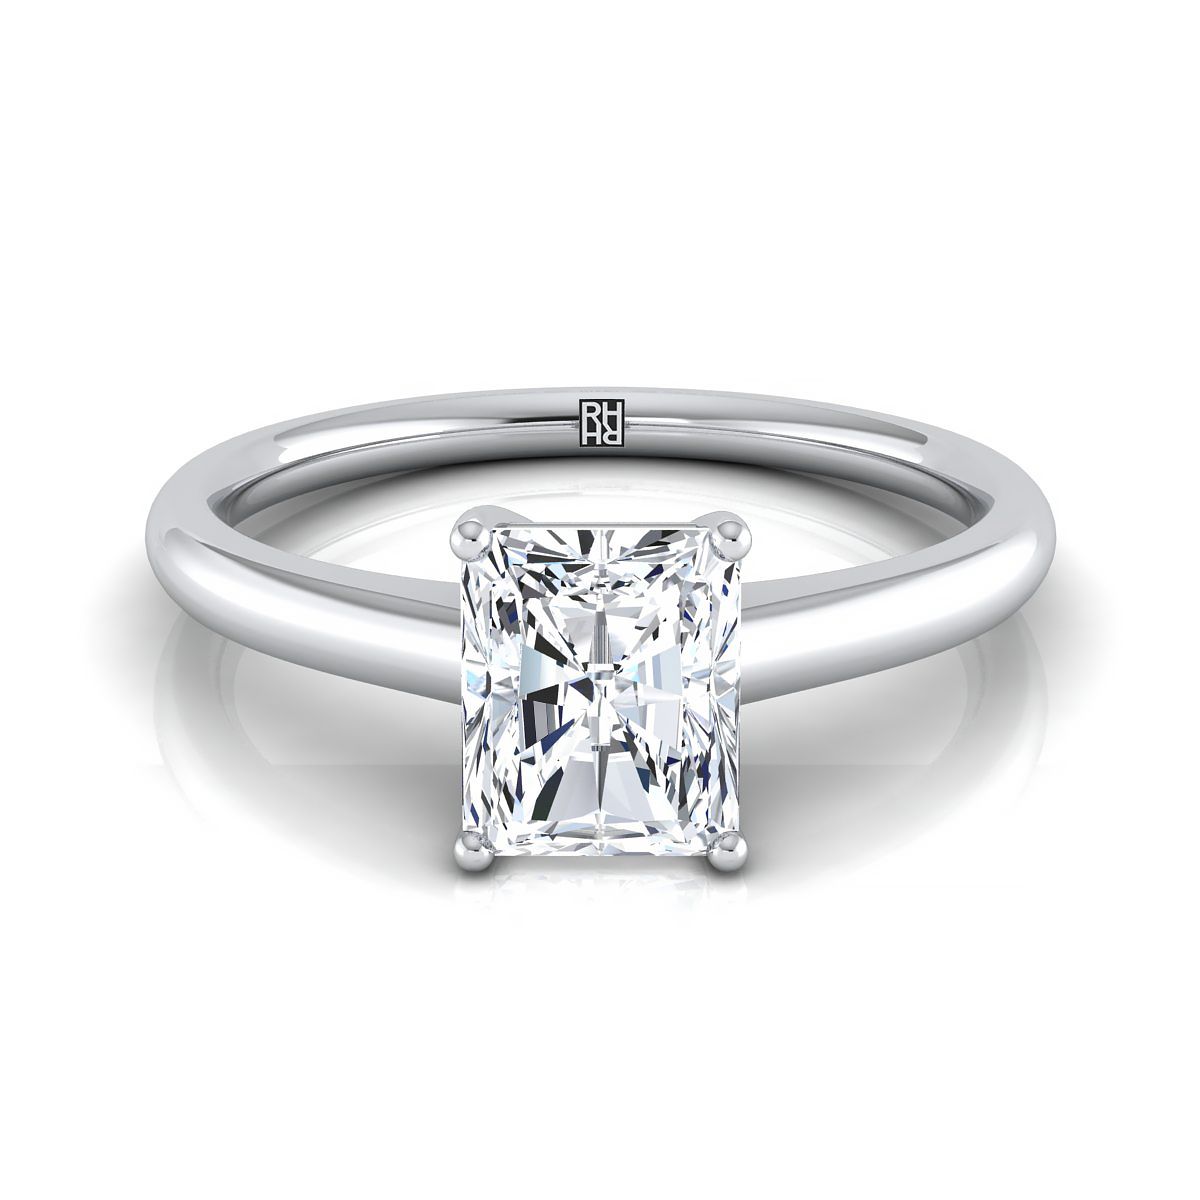 18K White Gold Radiant Cut Center Contemporary Comfort Fit Solitaire Engagement Ring